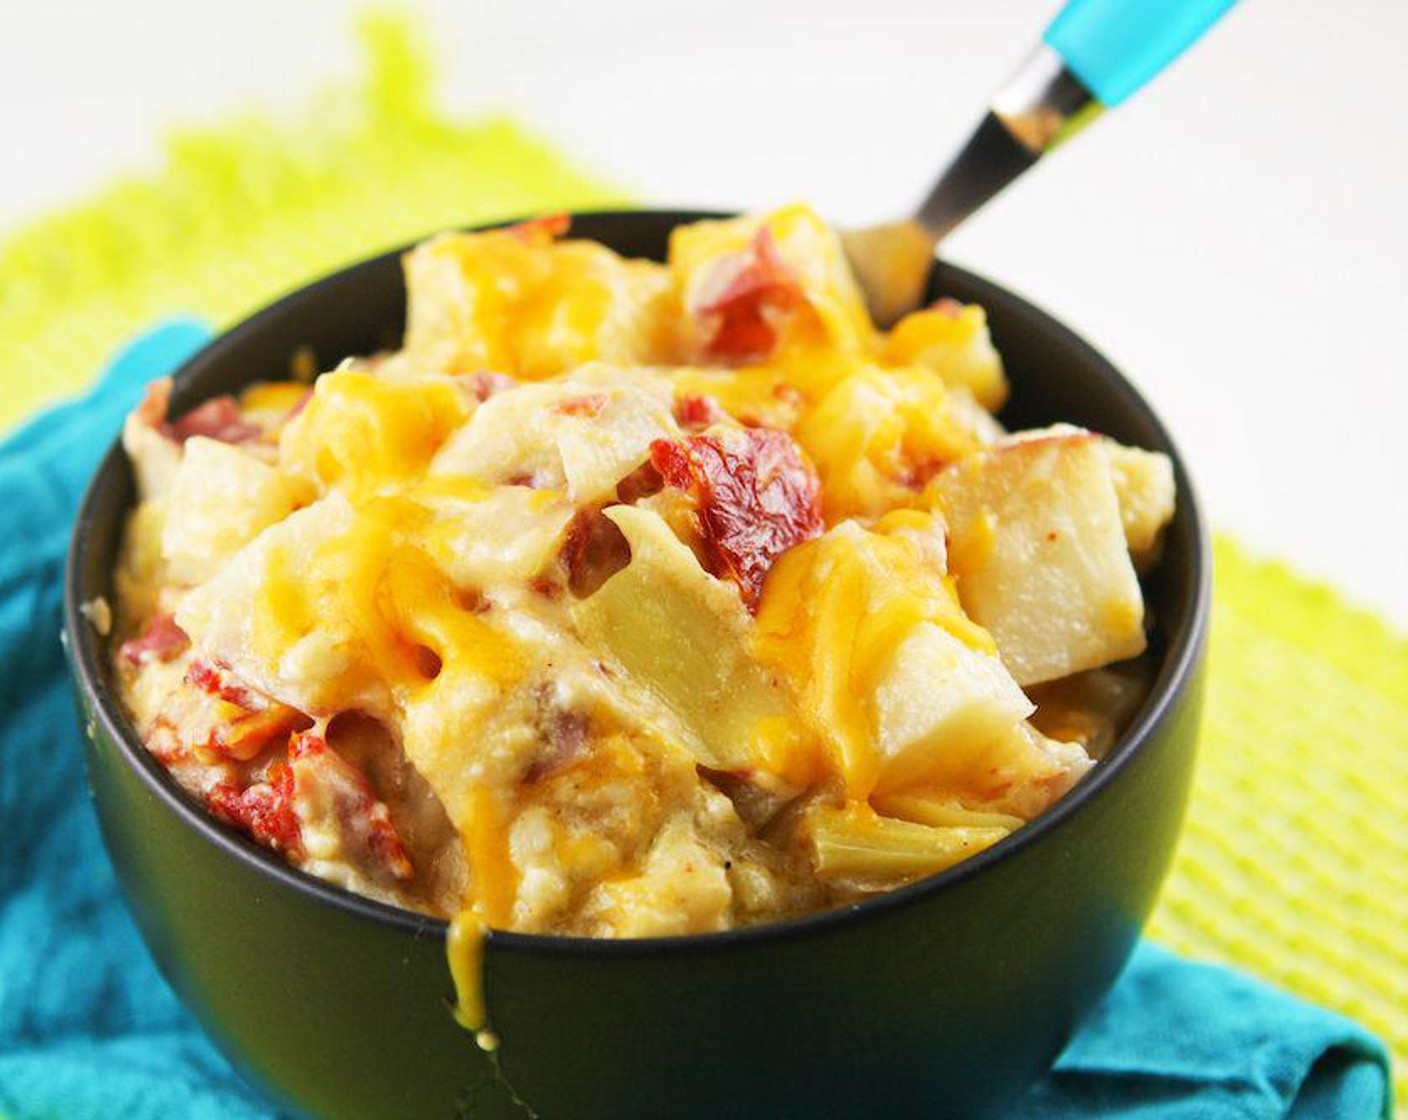 Baked Potato Casserole with Artichokes and Sun-Dried Tomatoes